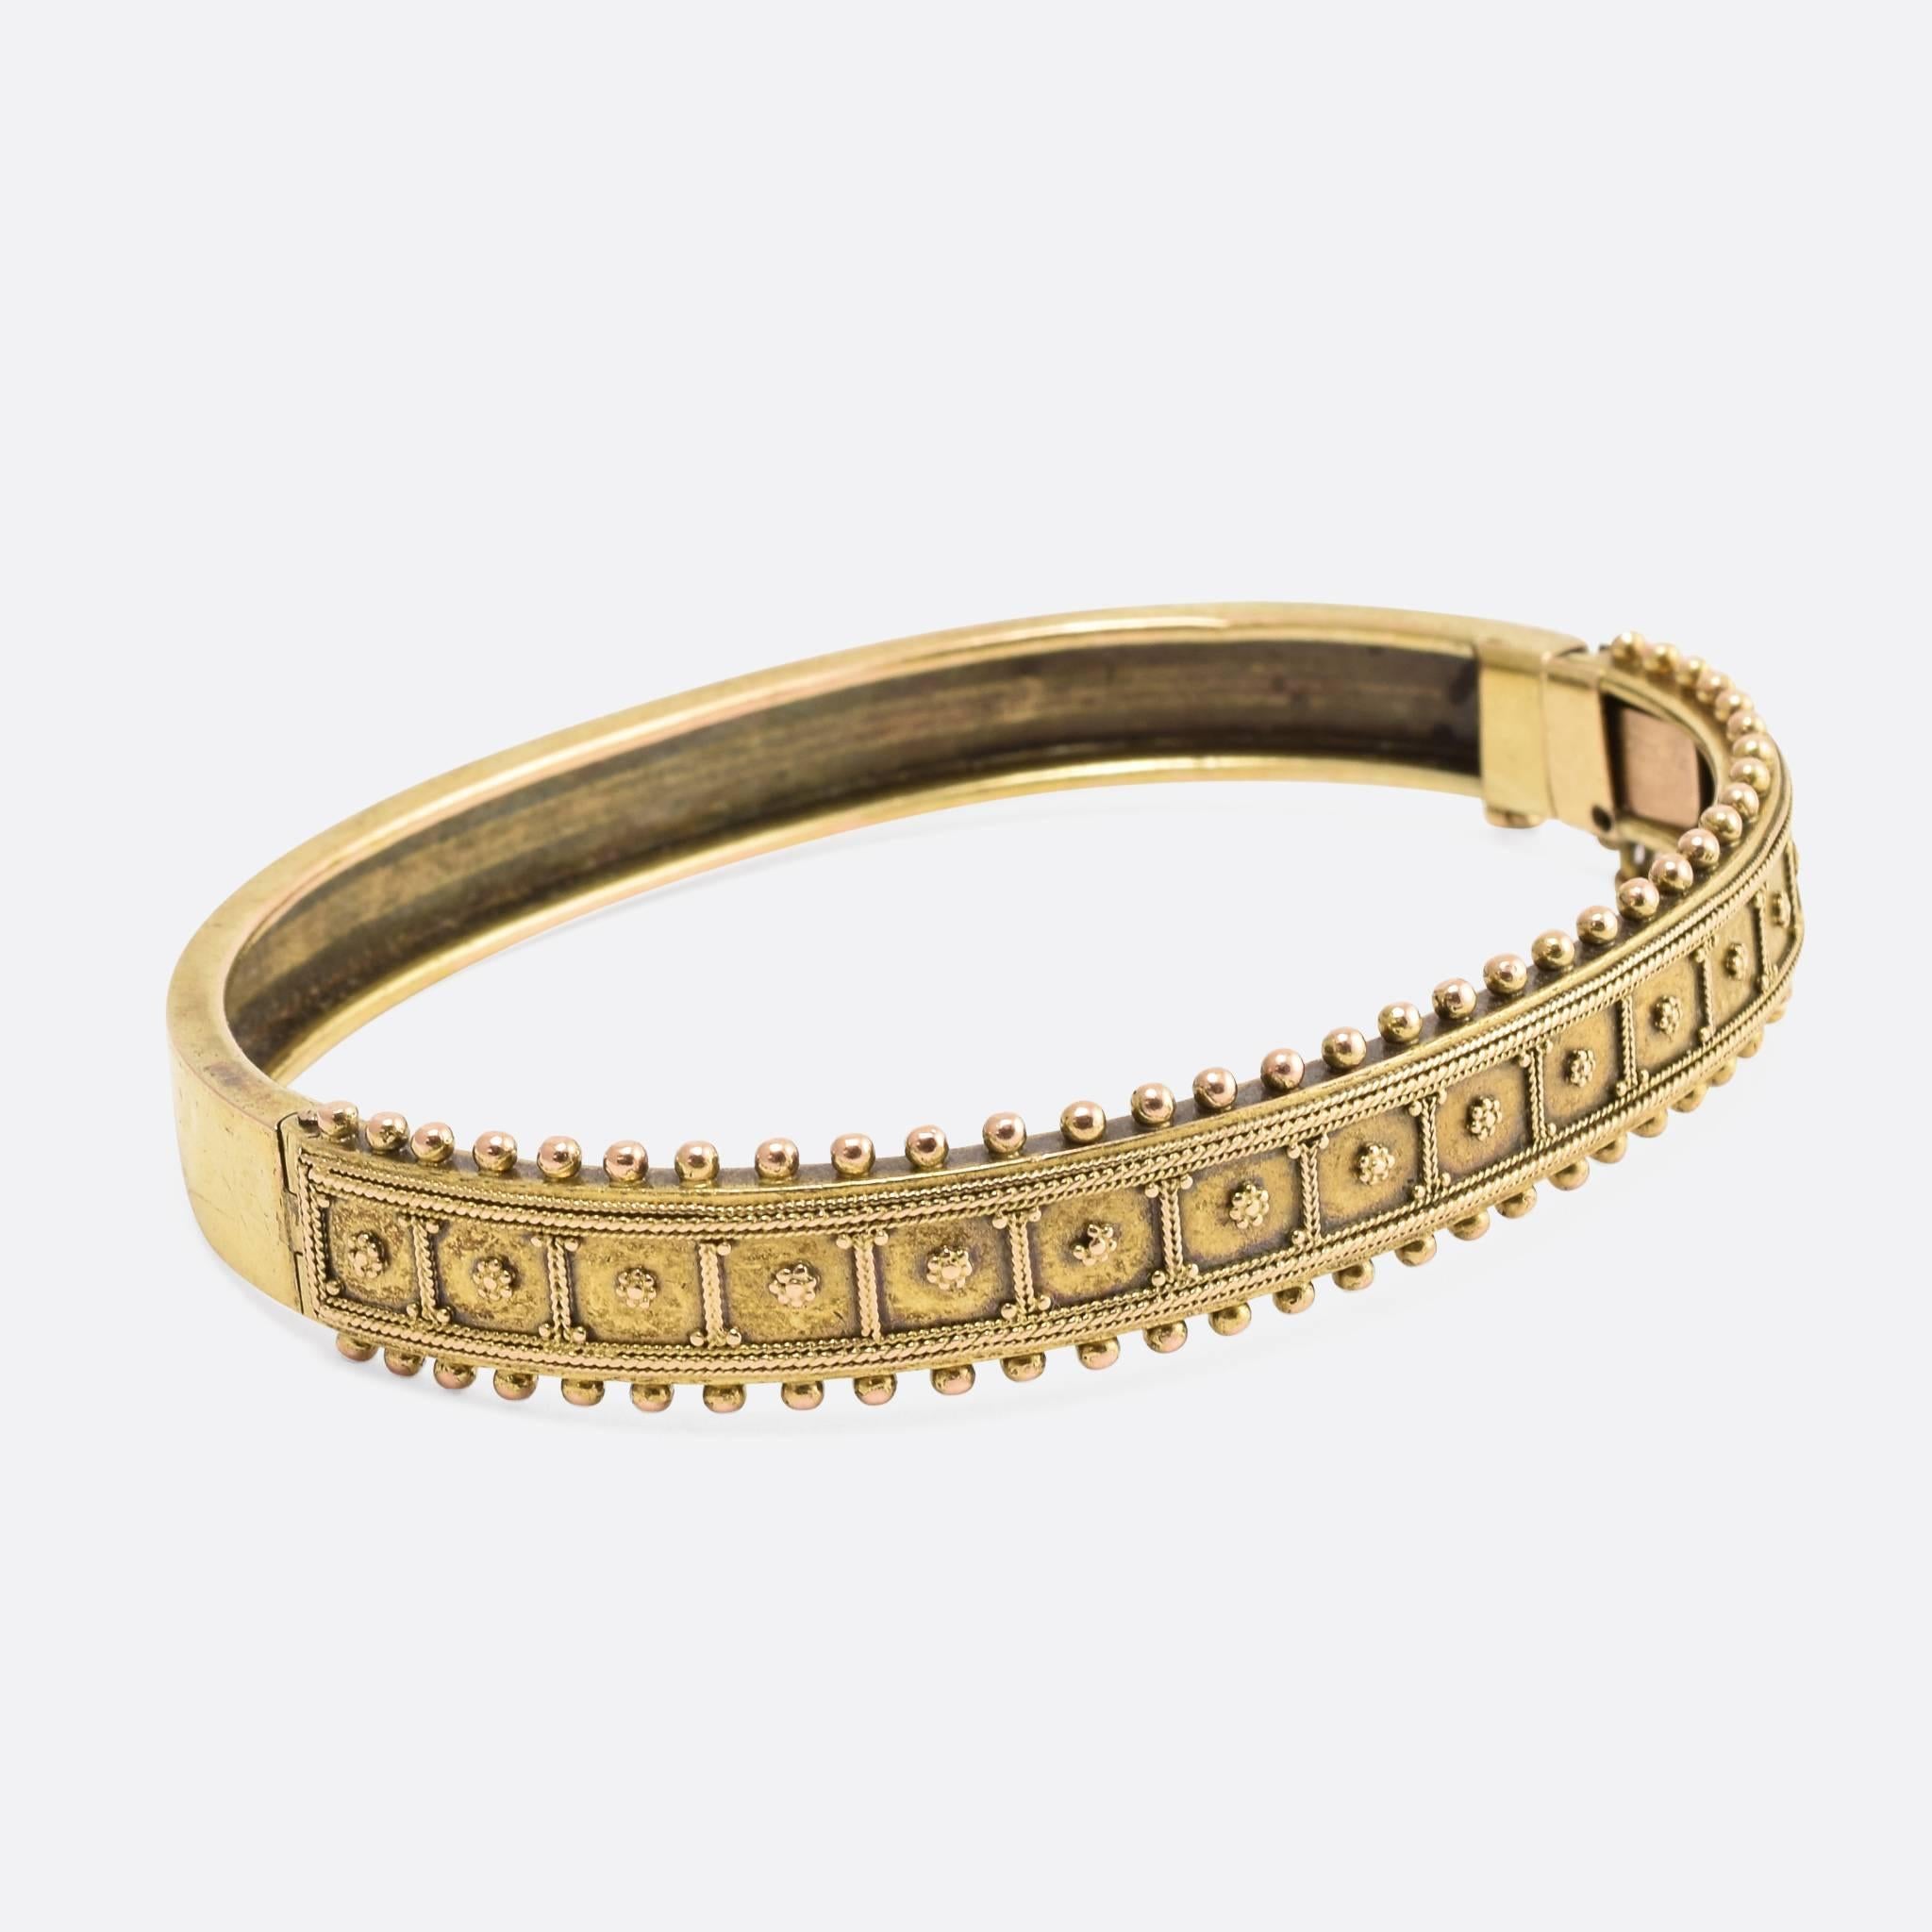 This attractive antique bangle dates to the mid-Victorian era, and is modelled in the Etruscan Revival style - with pretty pommel and applied rope-work designs. It's crafted from 15ct gold, and has acquired a gorgeous antique patina.